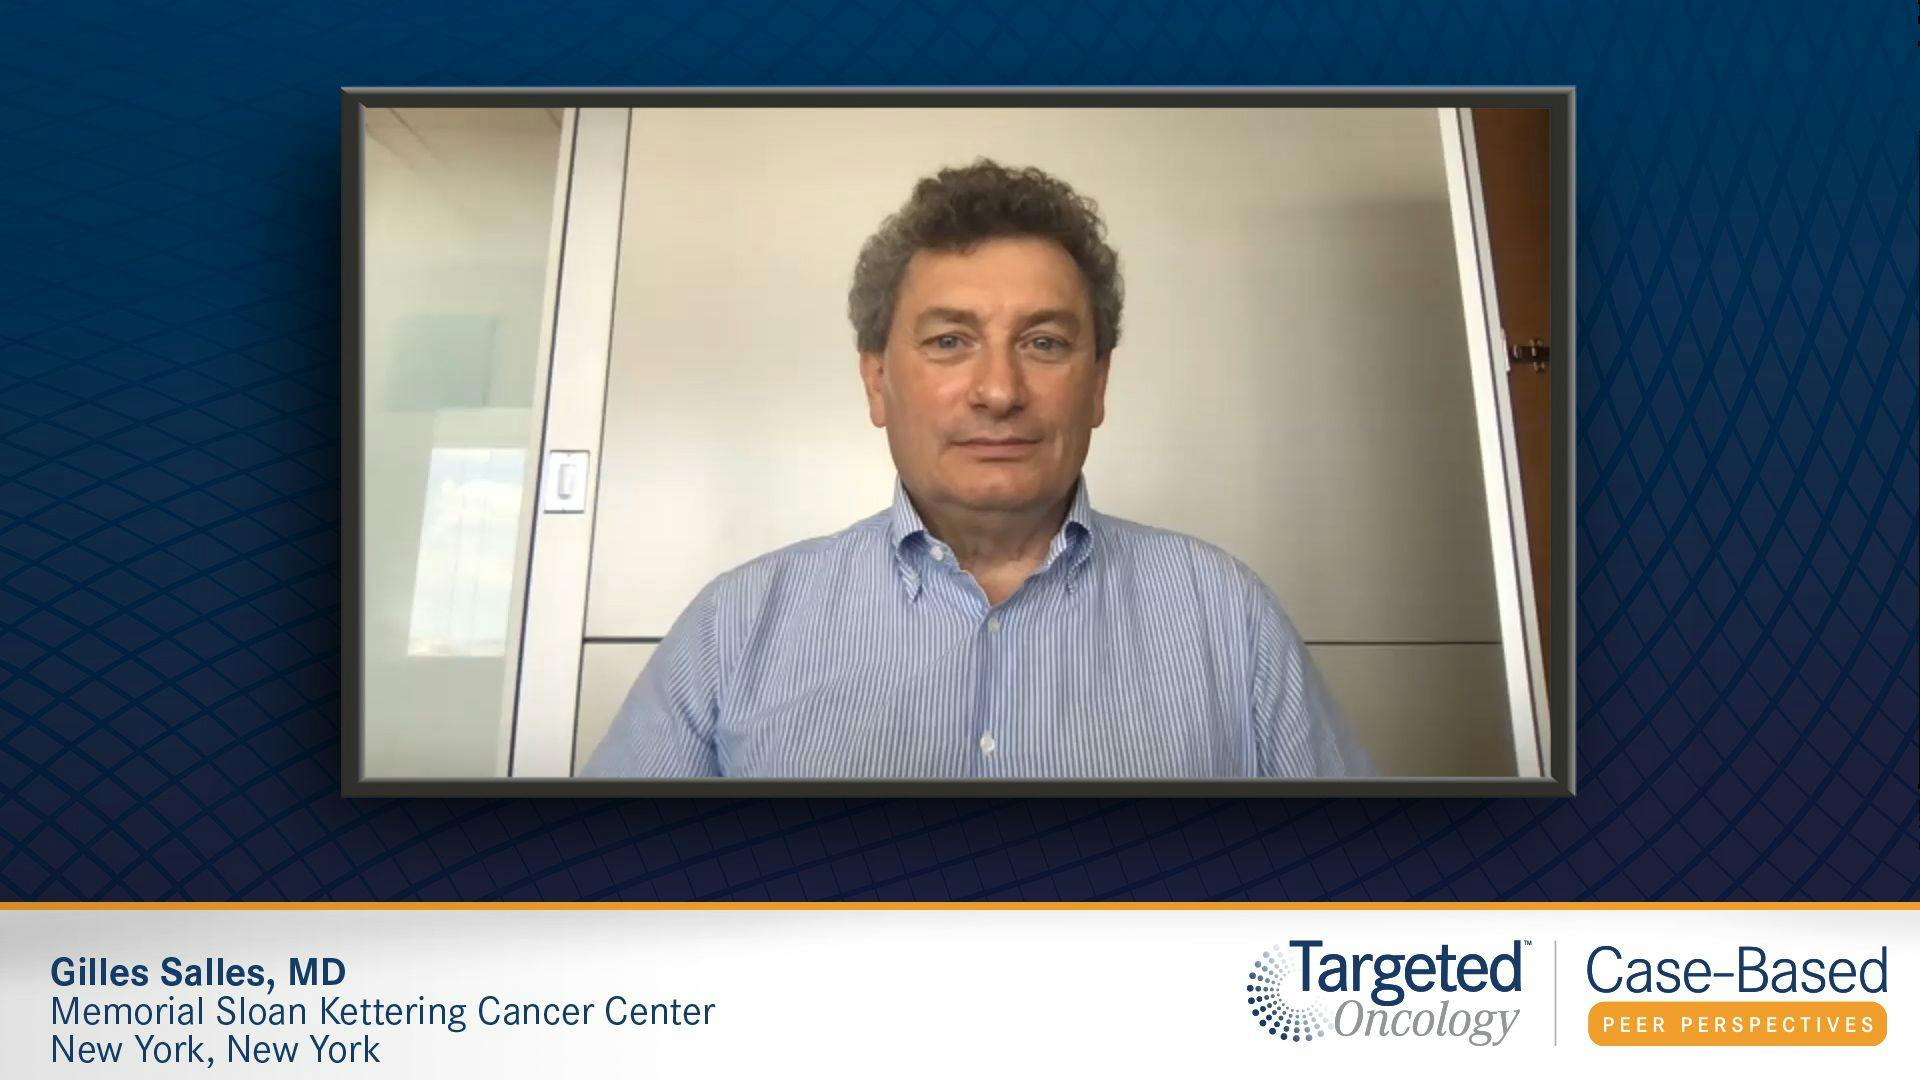 Novel Treatment Options in Diffuse Large B-Cell Lymphoma